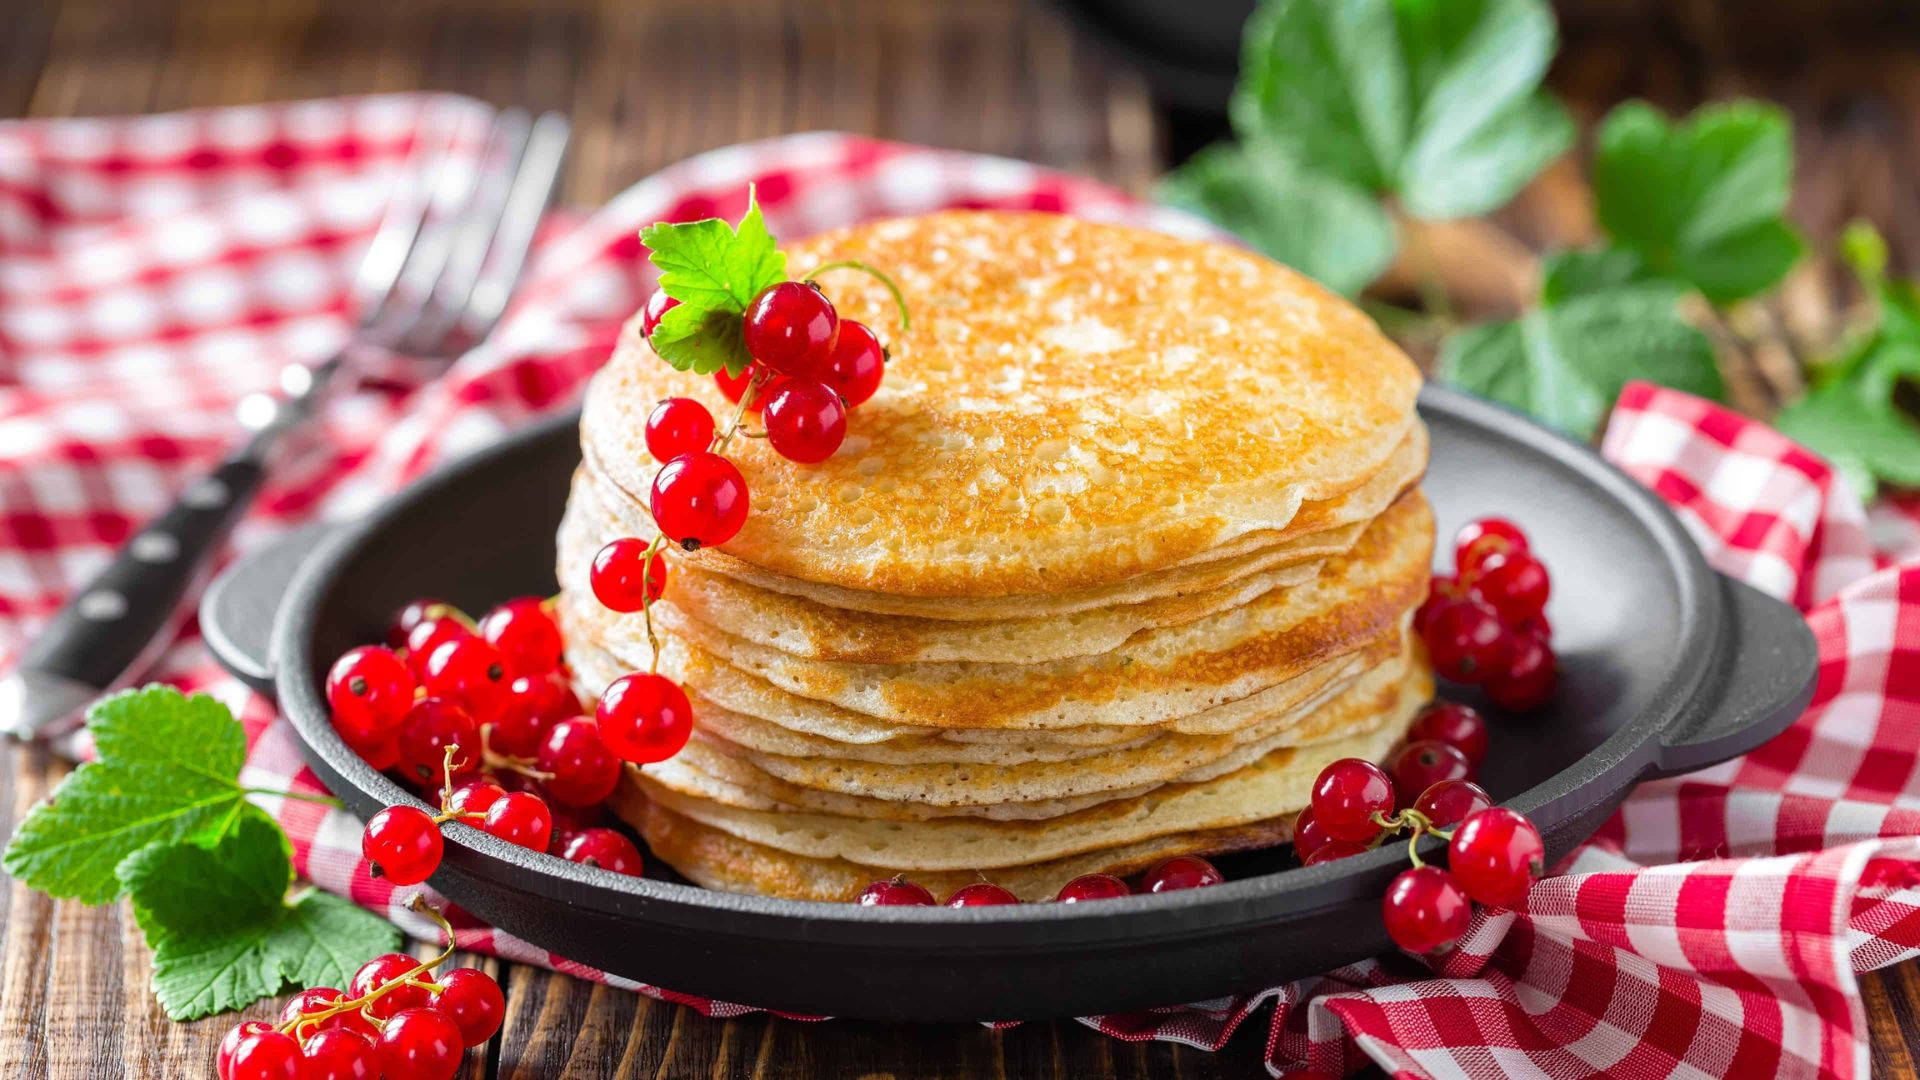 Pancakes On Tablecloth Background